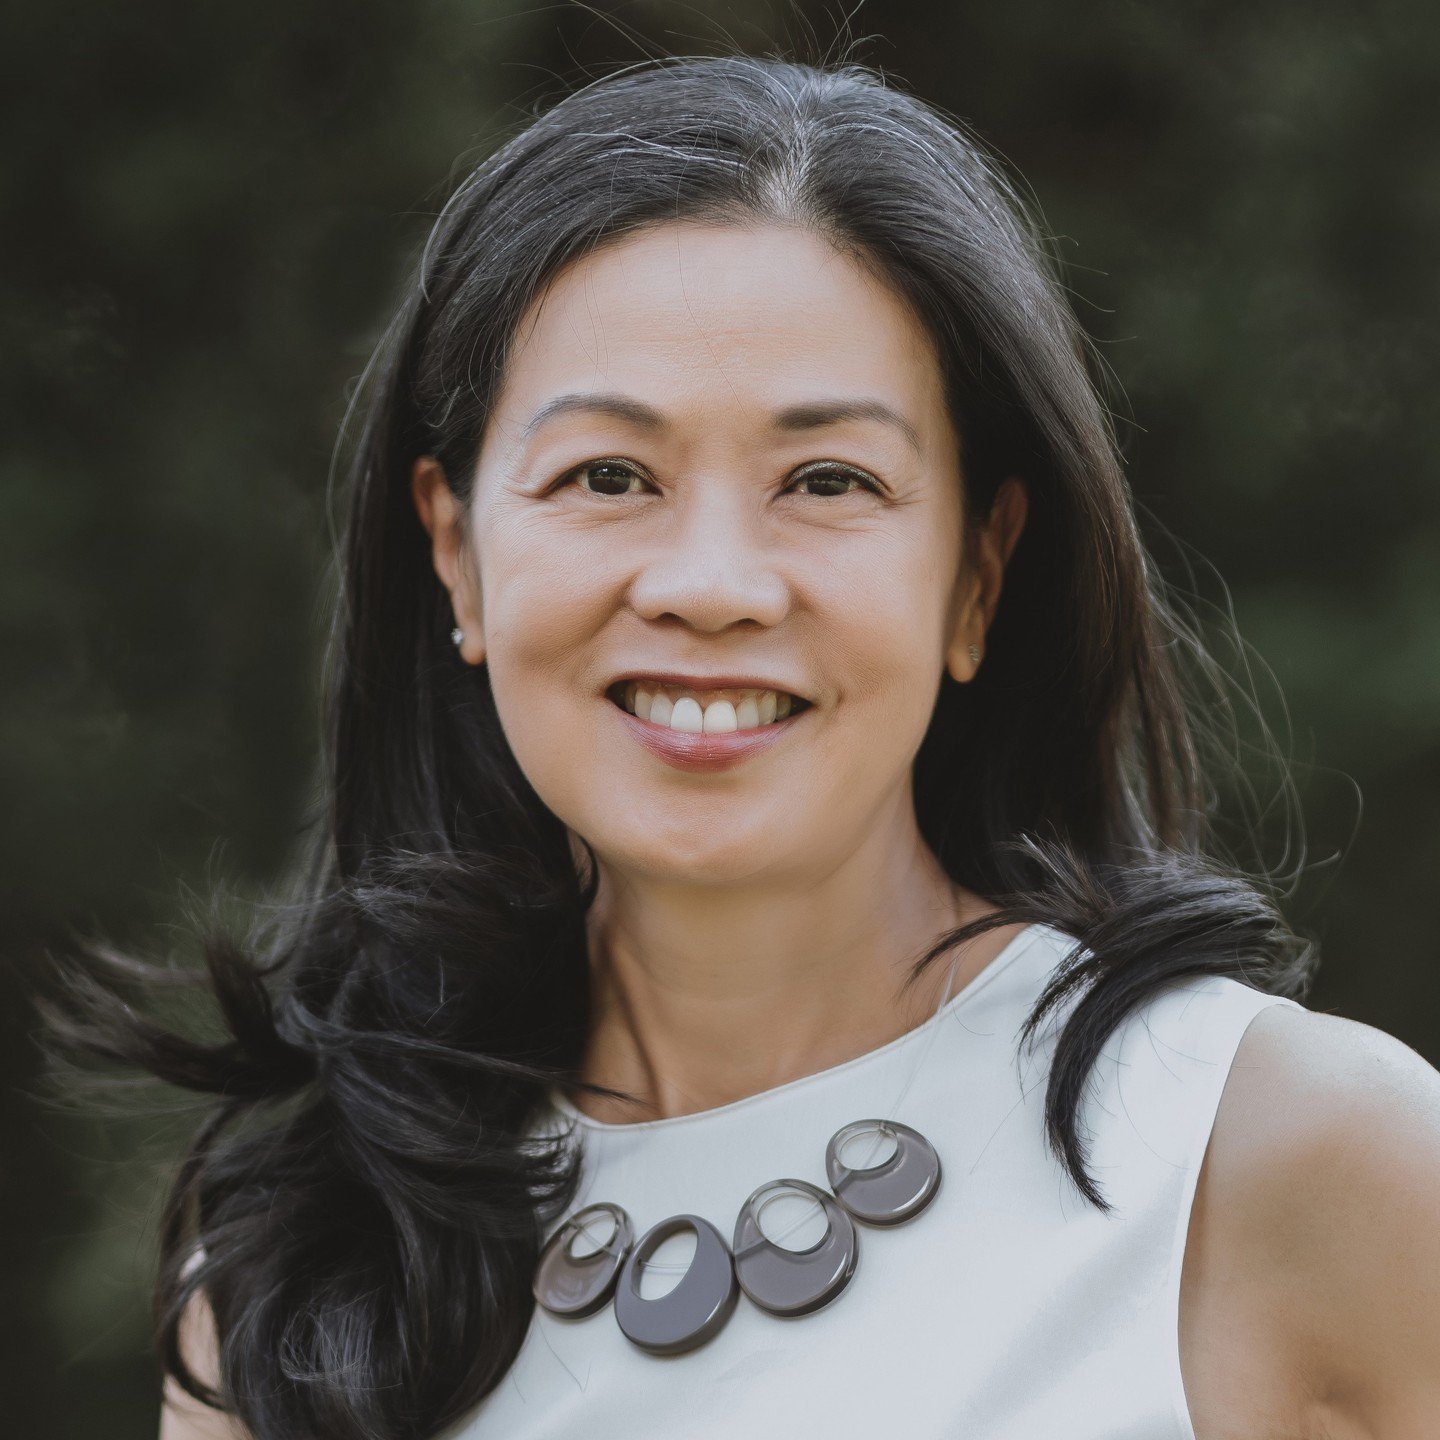 @panasianrep's 47th Art &amp; Action Benefit Dinner is on May 16 at @goldenunicornnyc! 

GET YOUR TICKETS NOW:
https://www.panasianrep.org/47th-benefit-dinner-tickets

MEET OUR PRESENTERS
Andrea Louie, Past Executive Director, A4
Presenter for @aaart